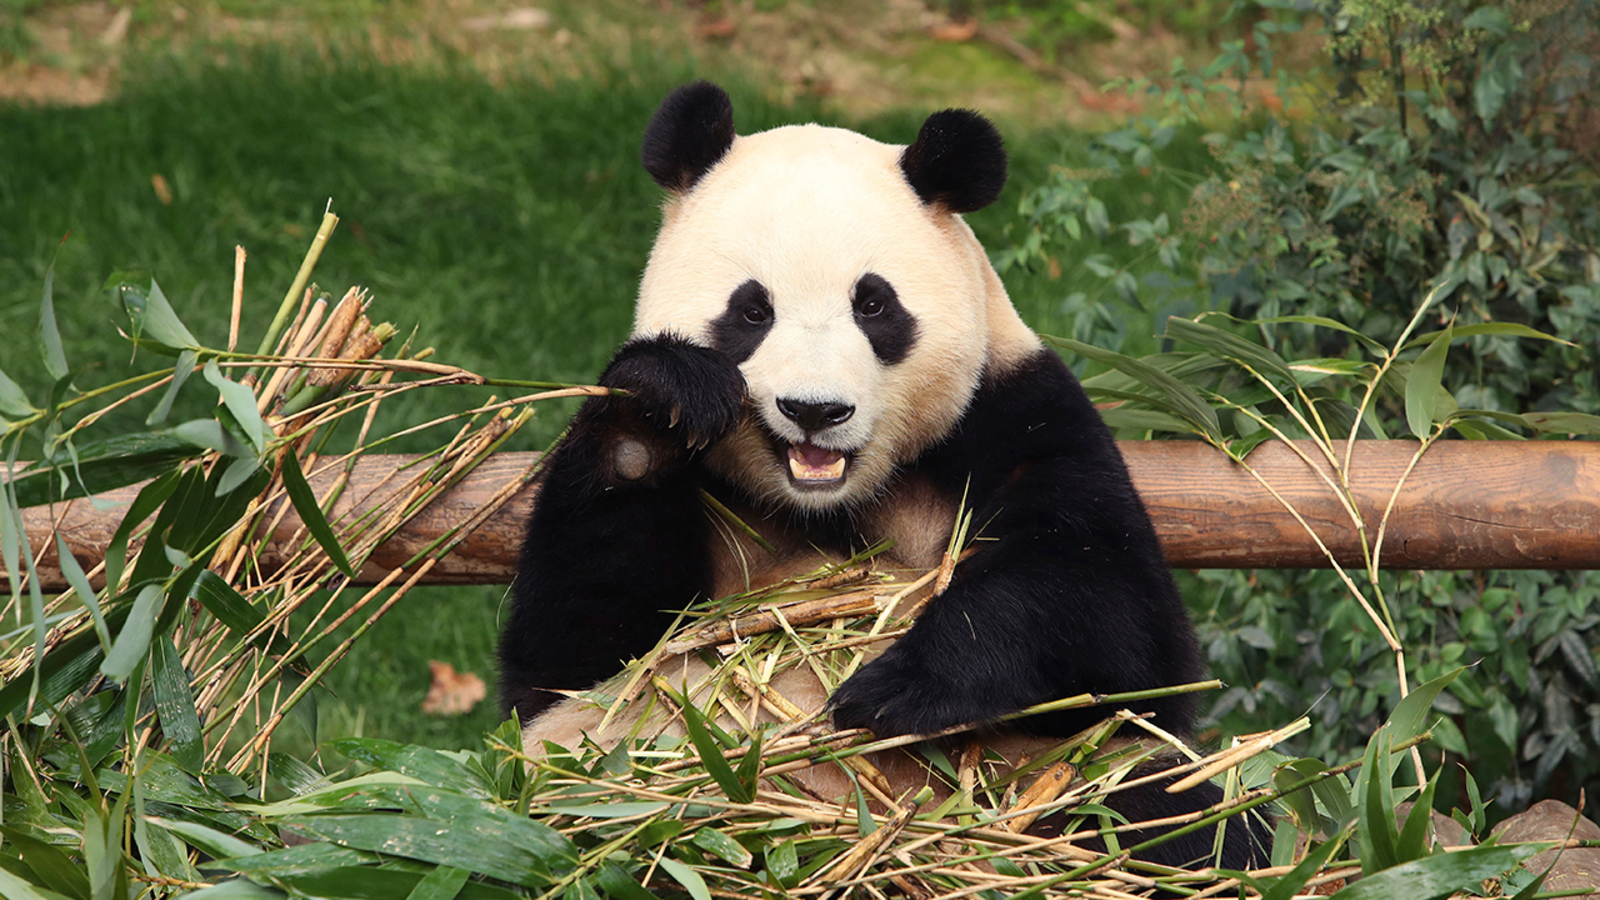 San Francisco Zoo to receive giant pandas from China, Mayor London Breed announces [Video]